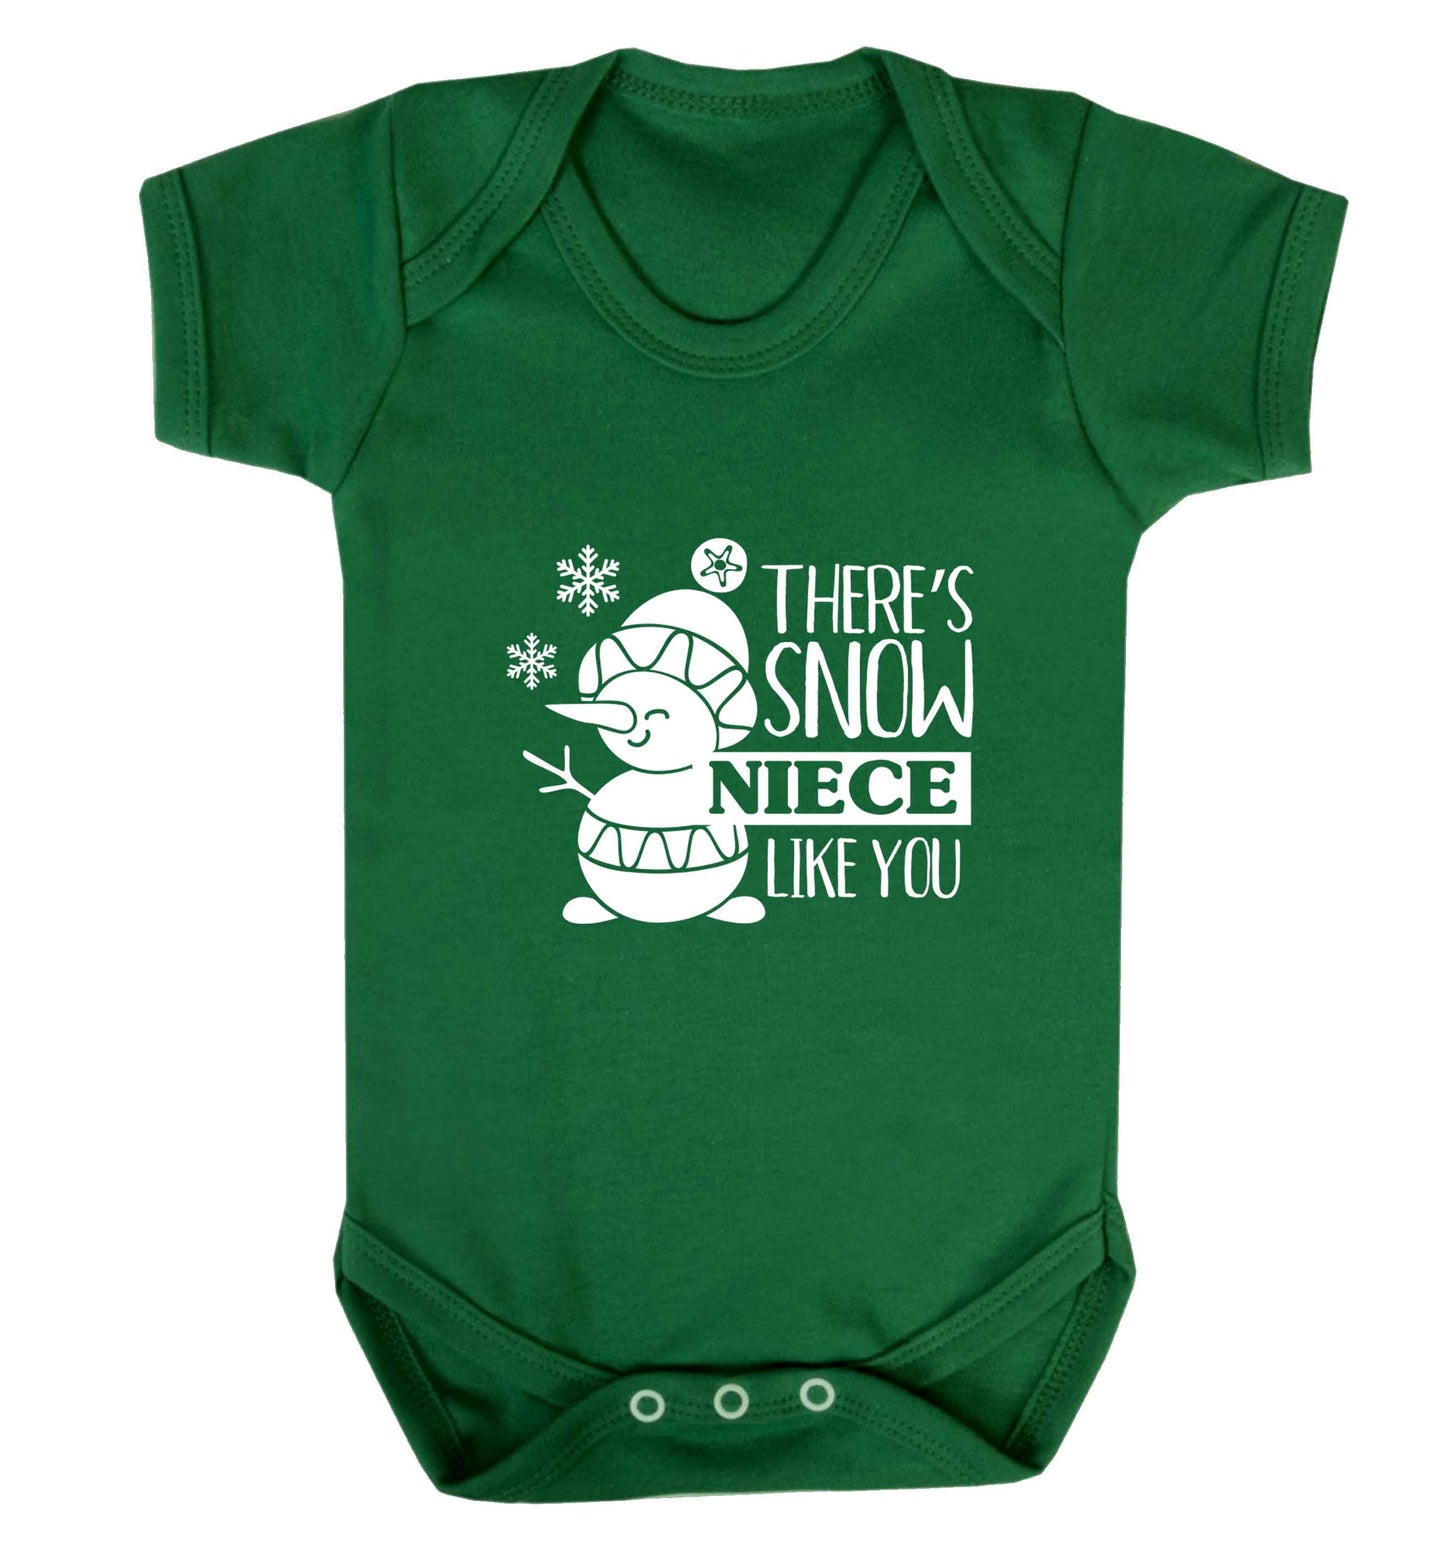 There's snow niece like you baby vest green 18-24 months